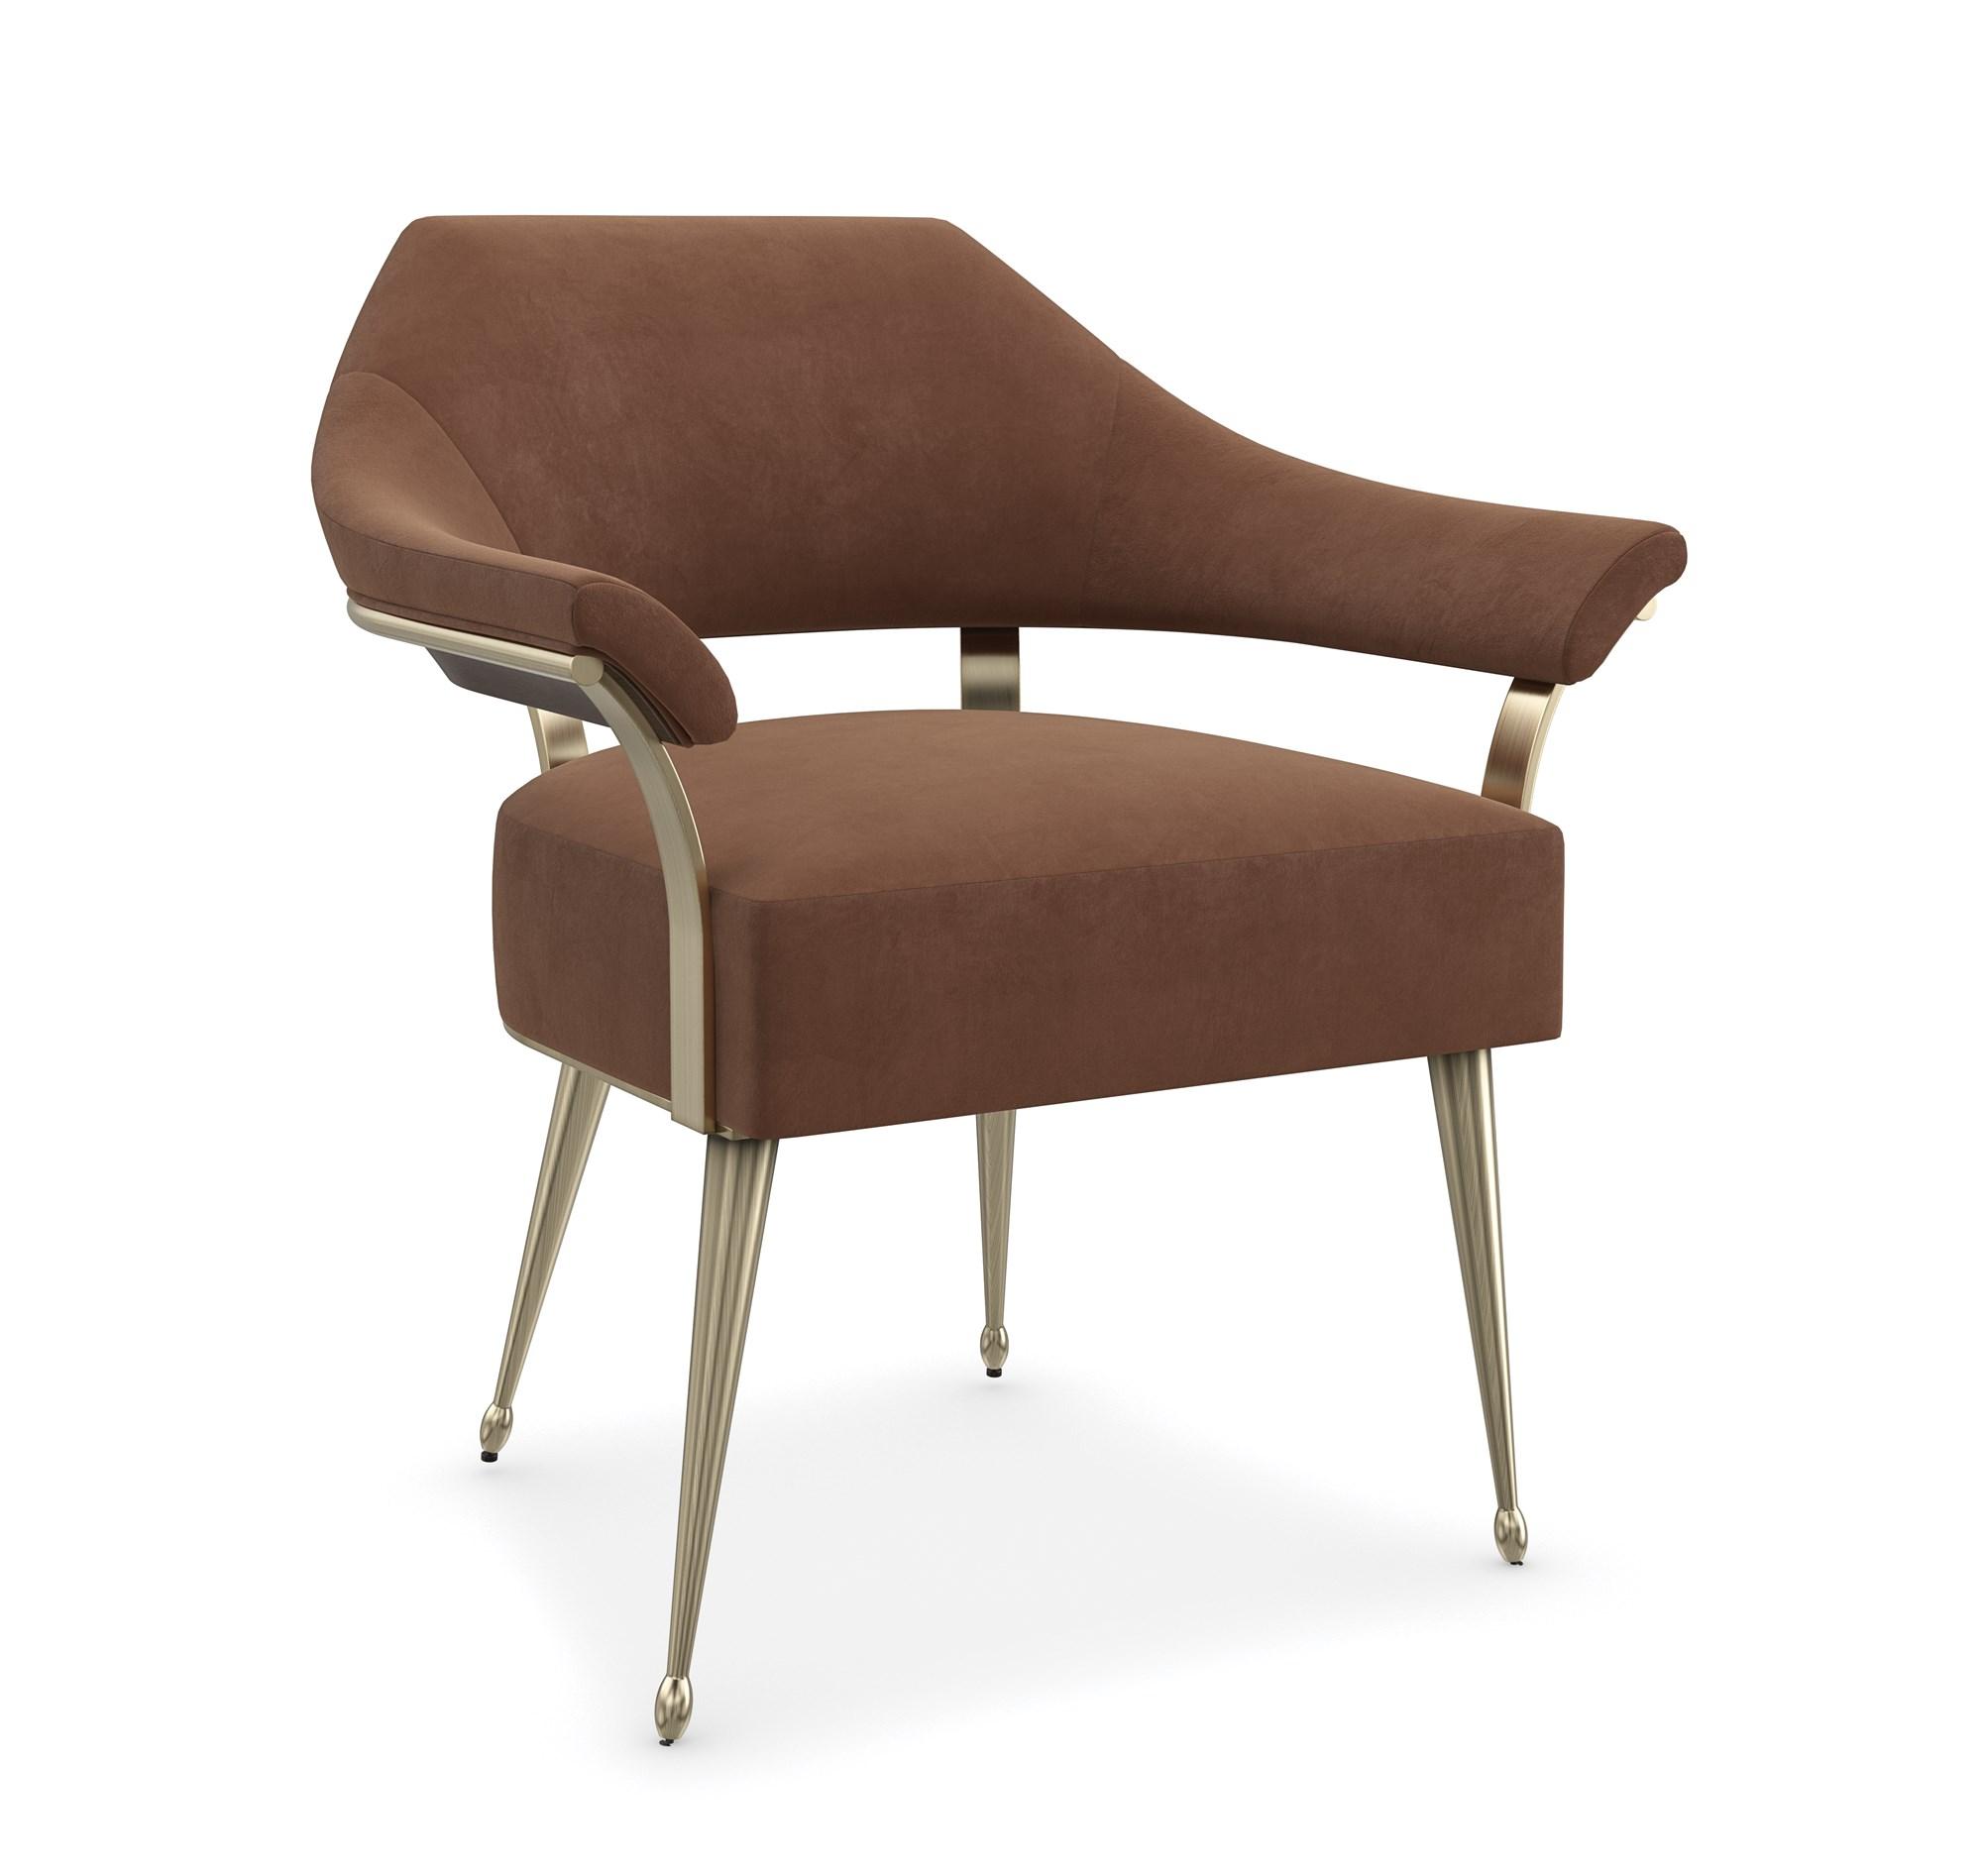 Contemporary Accent Chair LOUISETTE UPH-022-231-A in Rustic Brown, Champagne Velvet